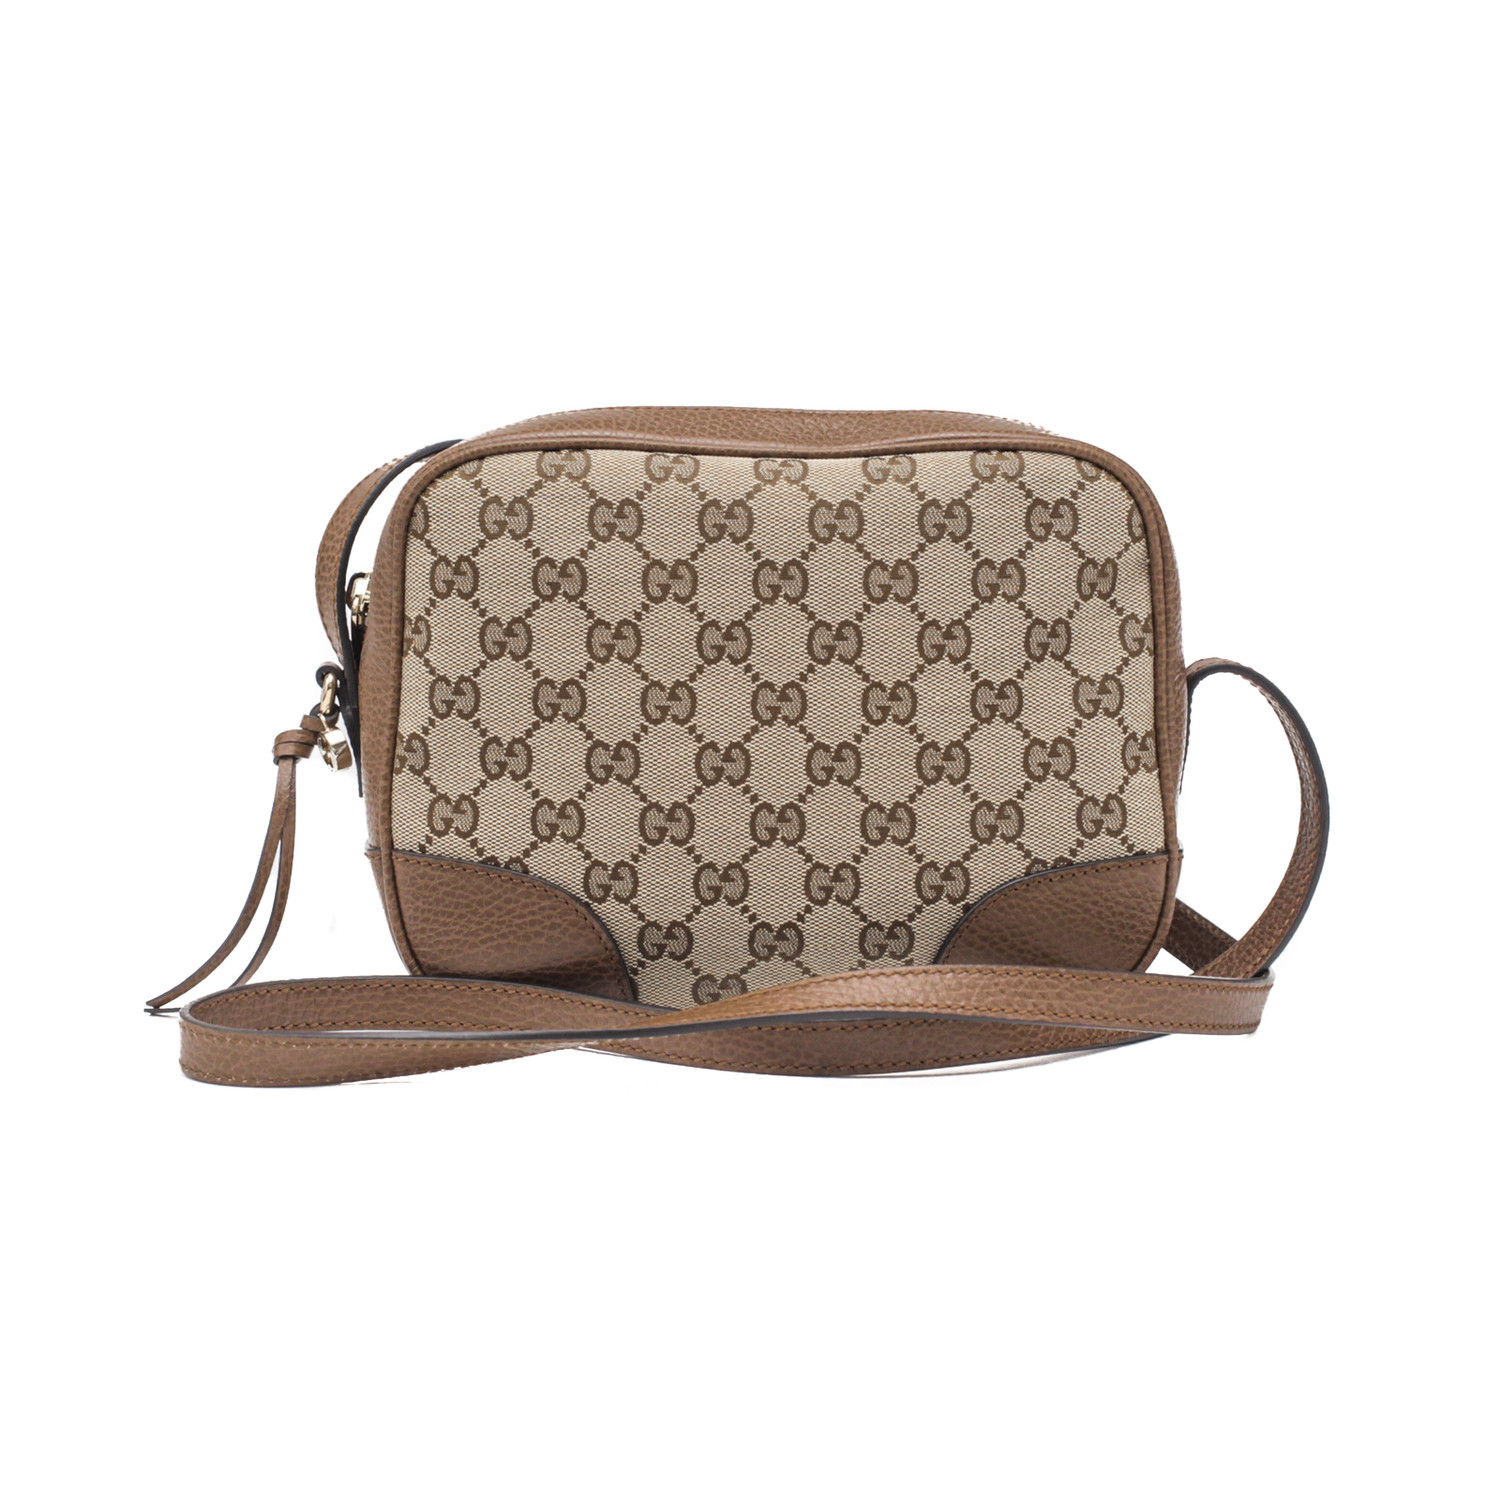 Gucci // Canvas GG Supreme Shoulder Bag // Brown - The Designer Collection - Touch of Modern